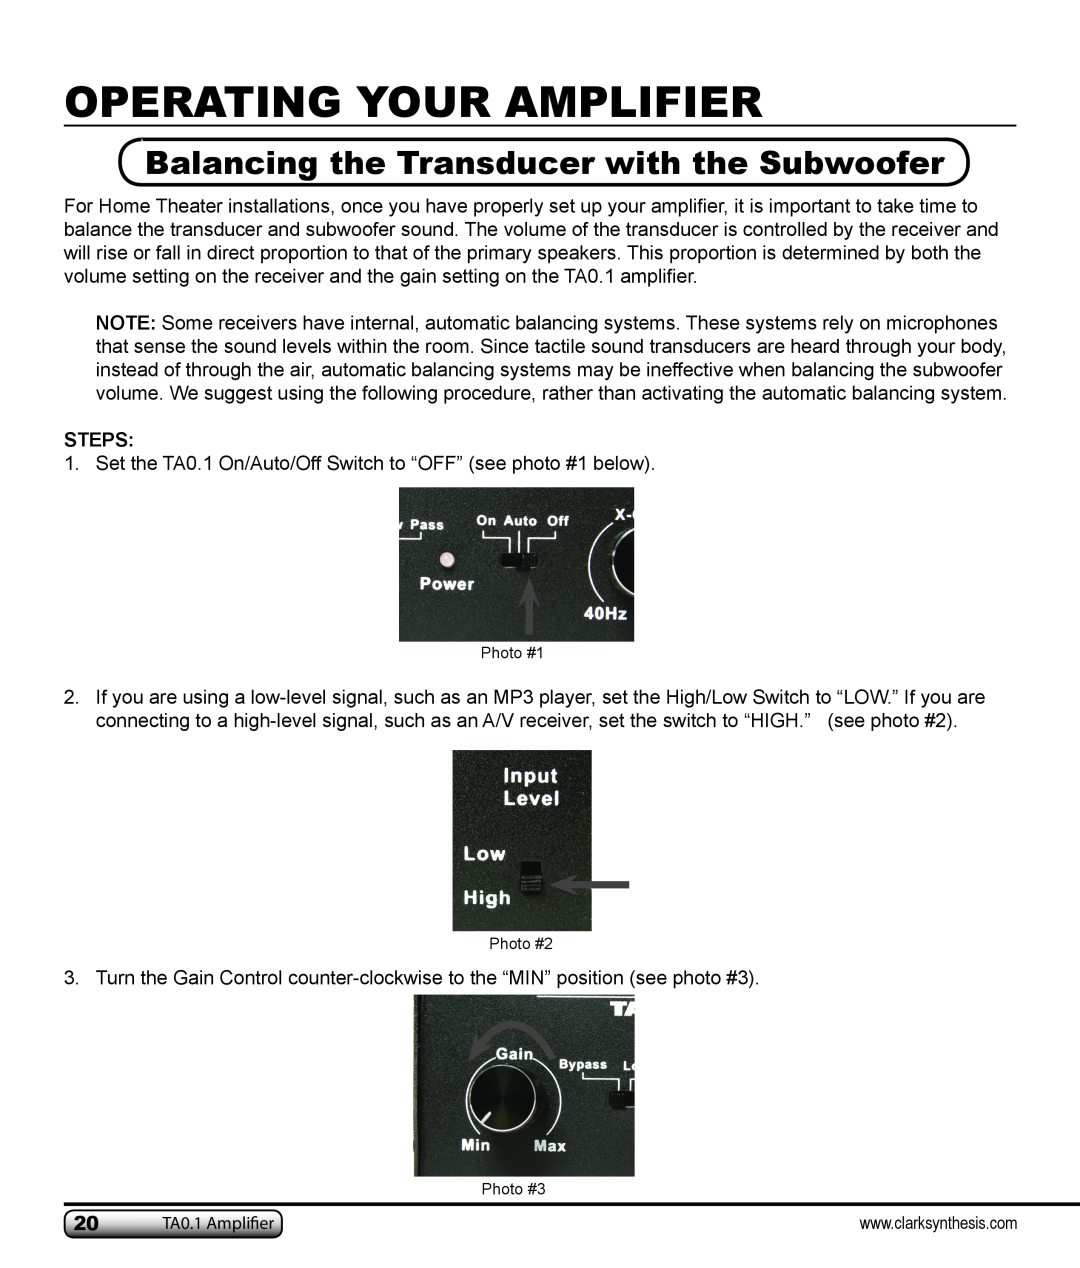 Clark Synthesis TA0.1 owner manual Operating Your Amplifier, Balancing the Transducer with the Subwoofer 